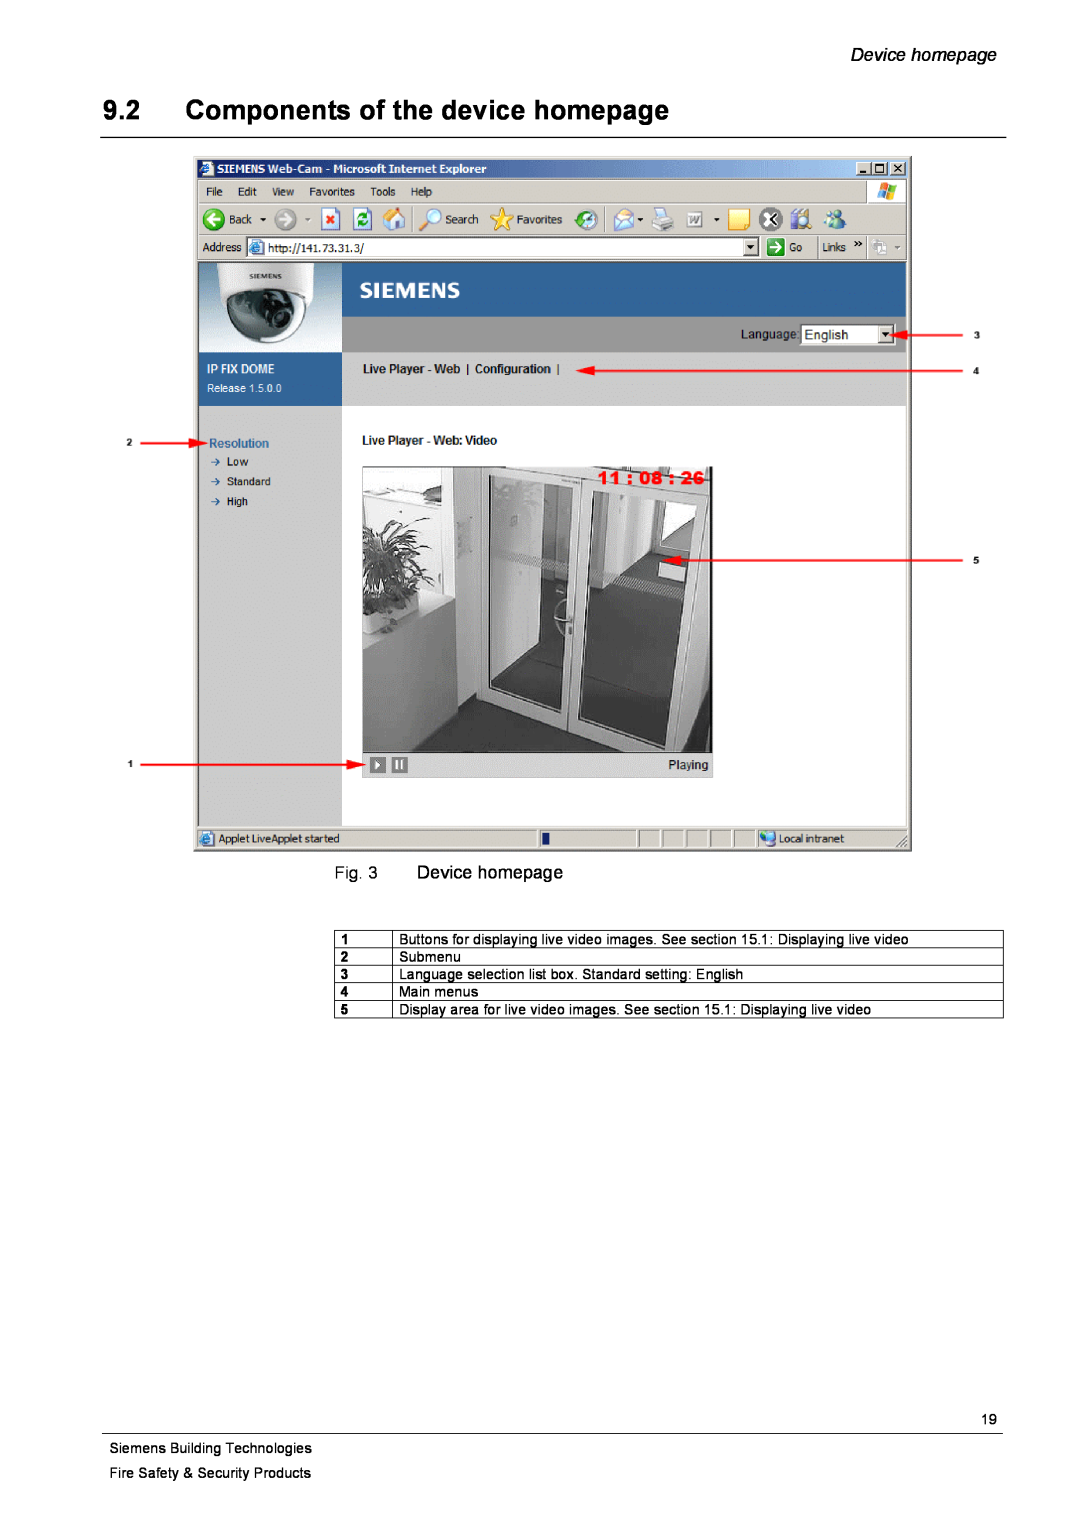 Siemens CFVA-IP user manual 9.2Components of the device homepage, Device homepage 